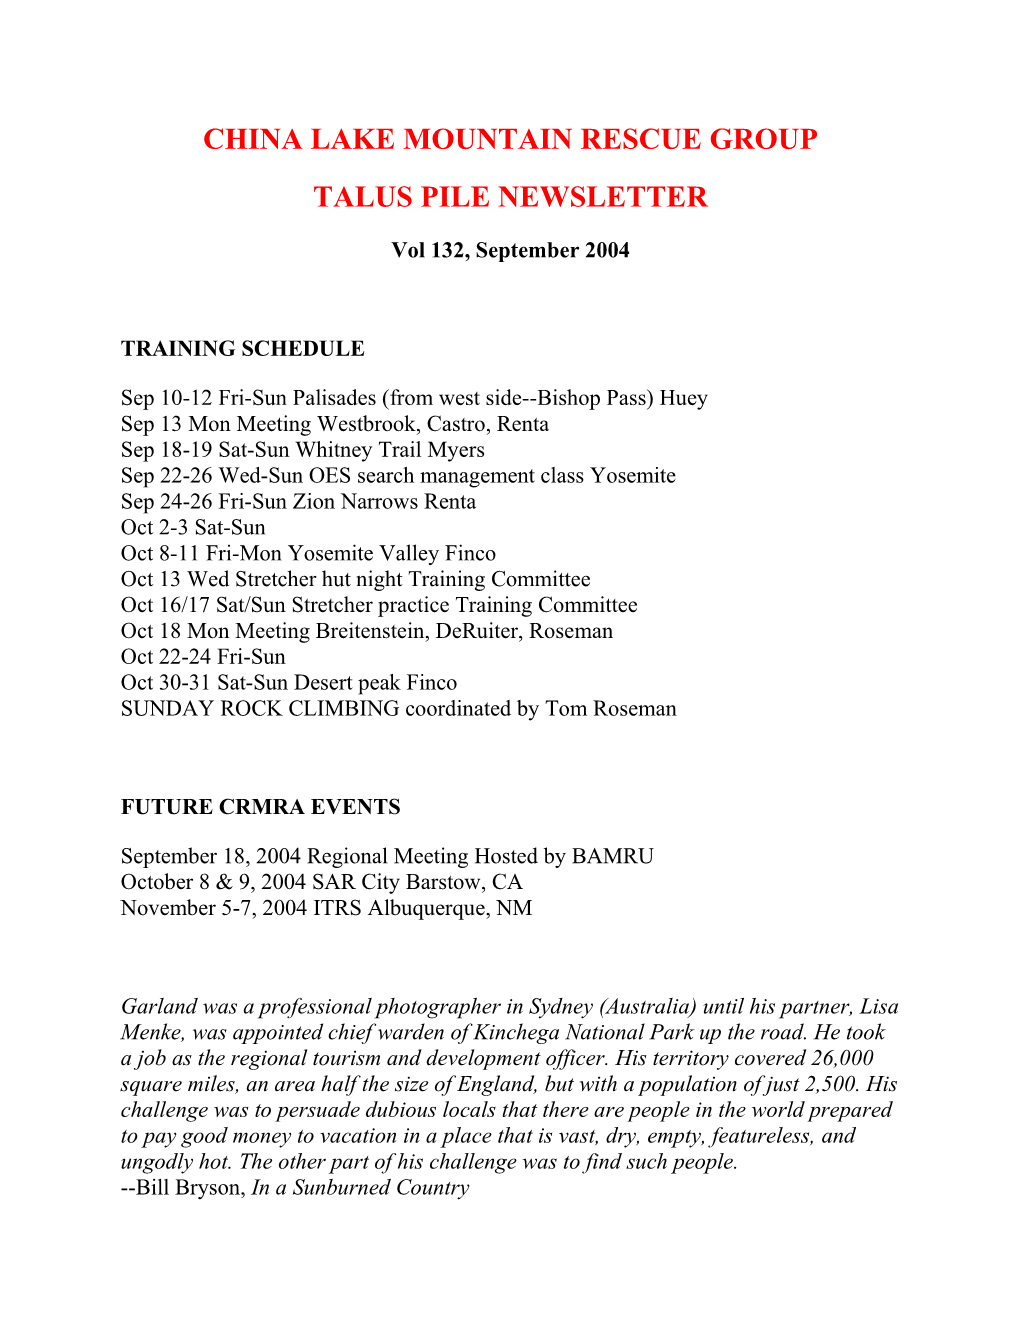 China Lake Mountain Rescue Group Talus Pile Newsletter